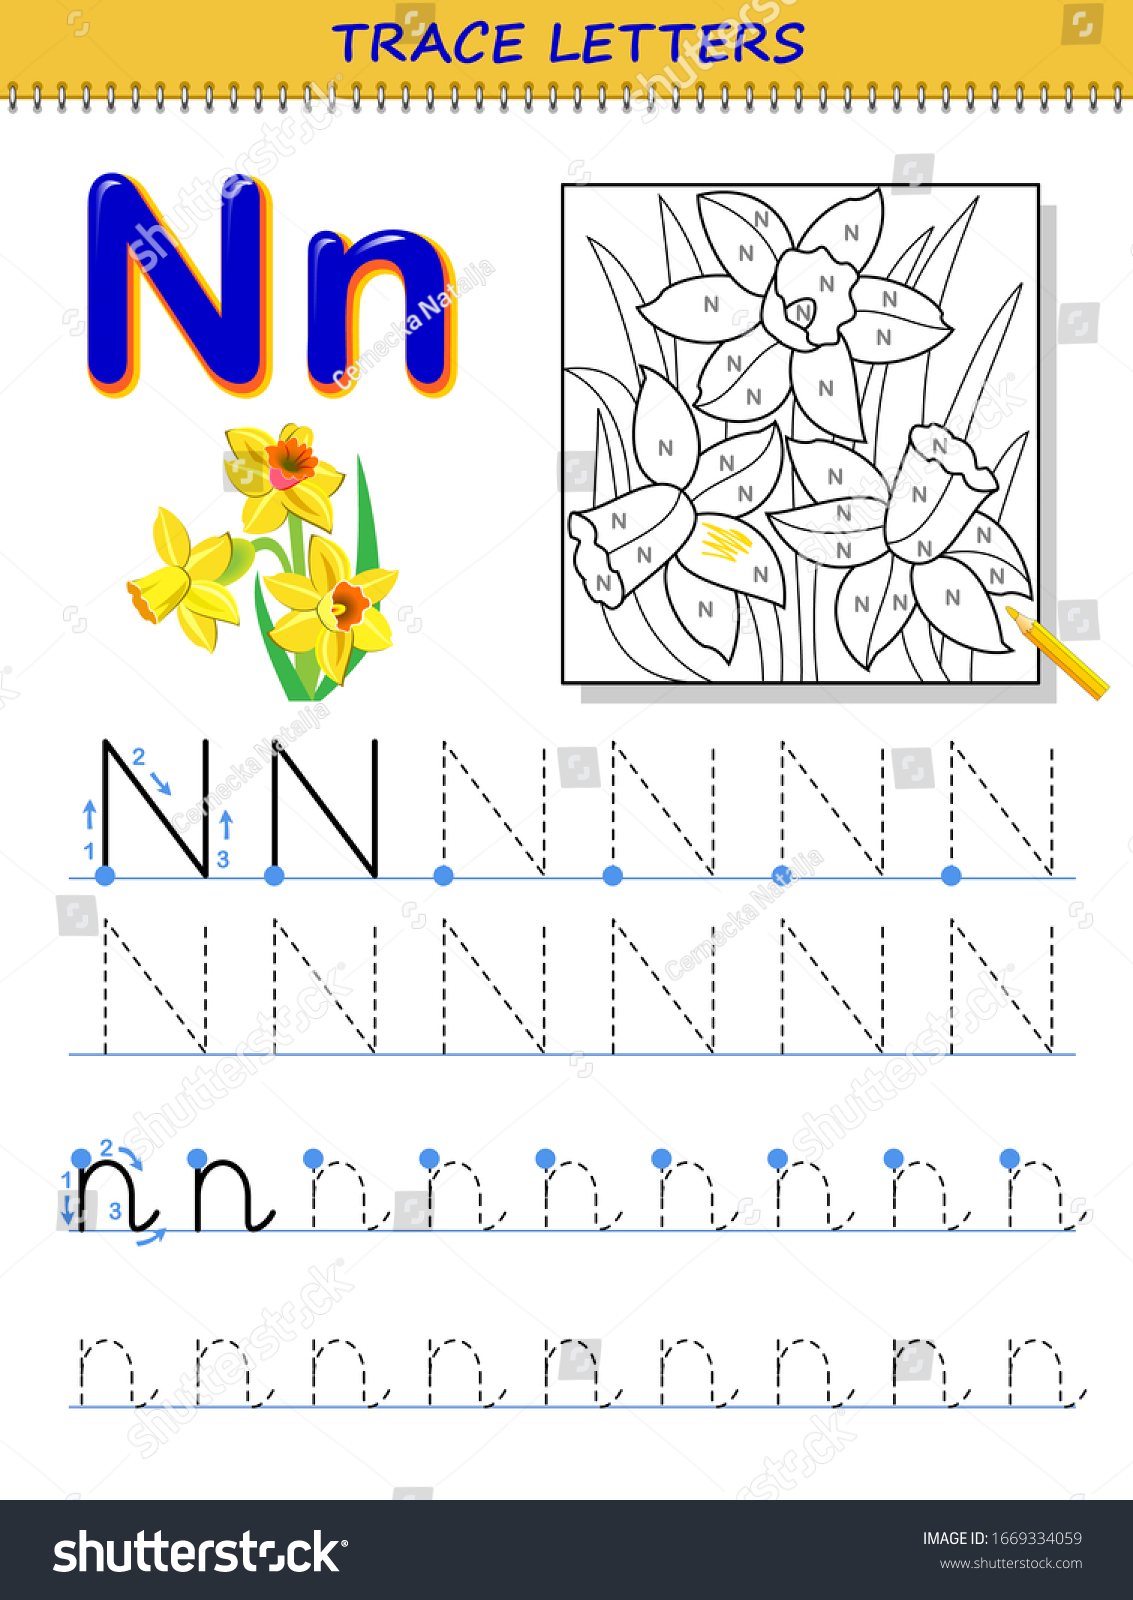 tracing letter n study alphabet printable stock vector royalty free 1669334059 shutterstock